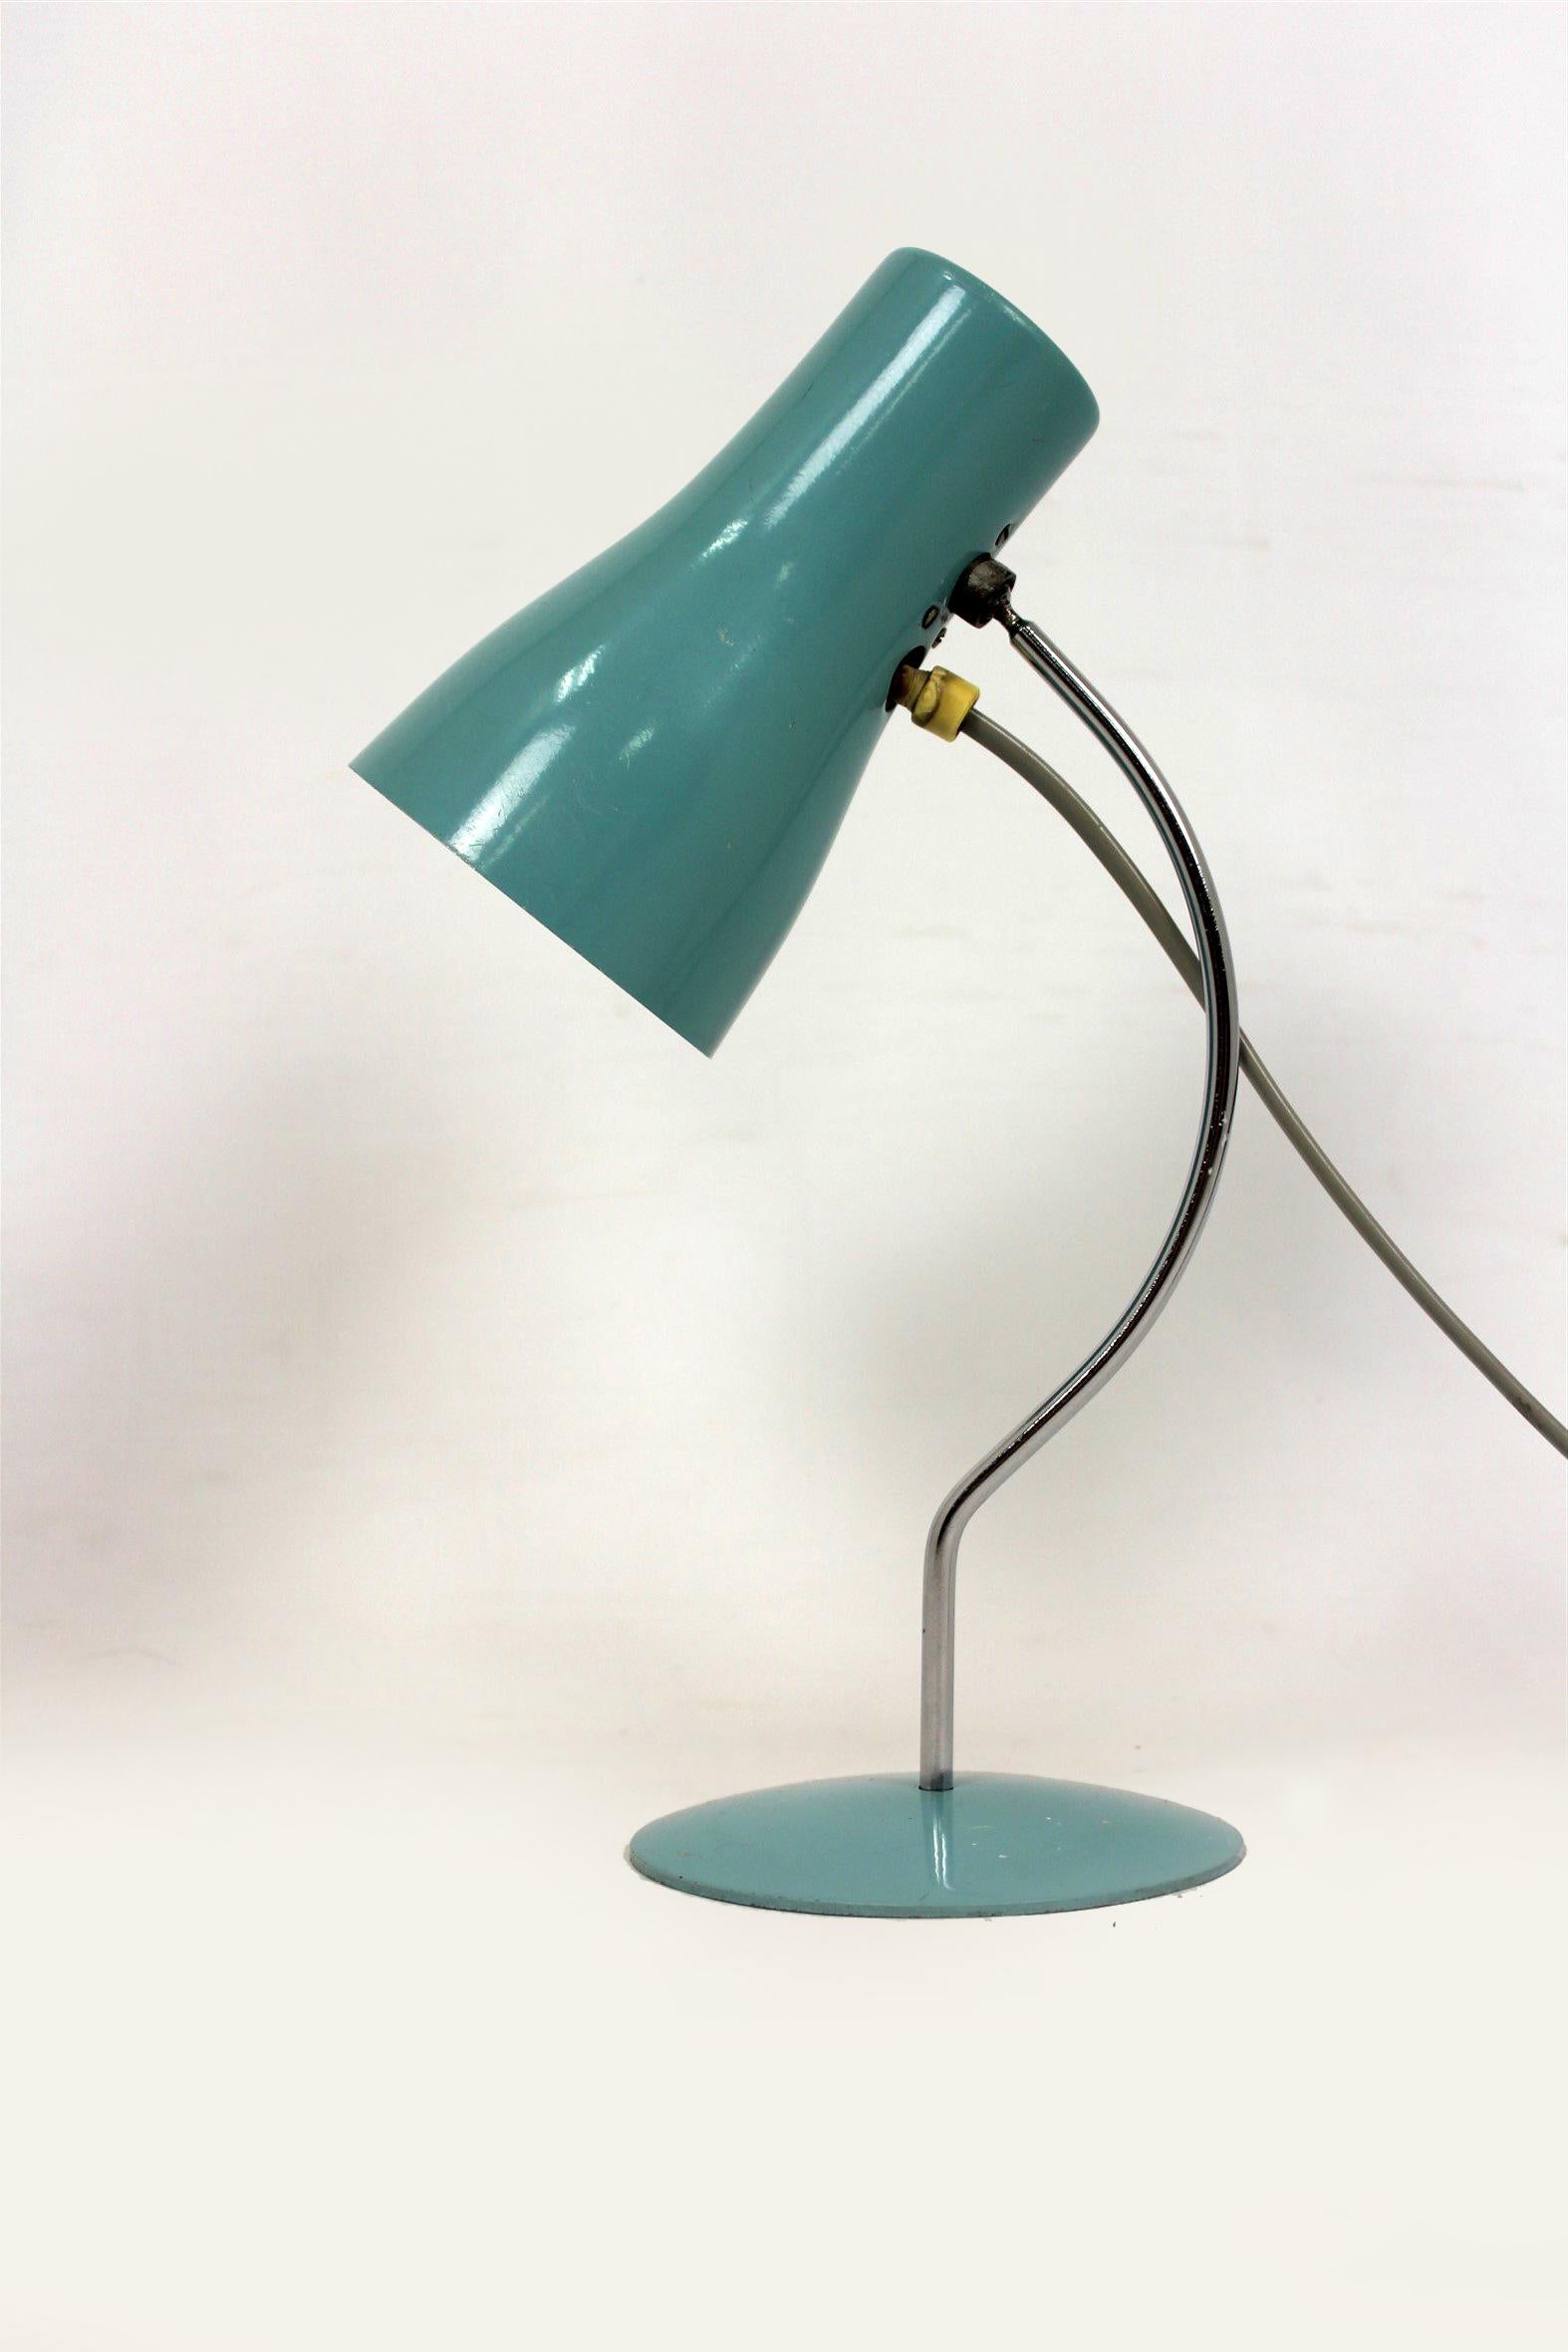 Vintage table lamp from Napako. Designed by Josef Hurka and produced in the 1960s. Lamp is fully functional.
   